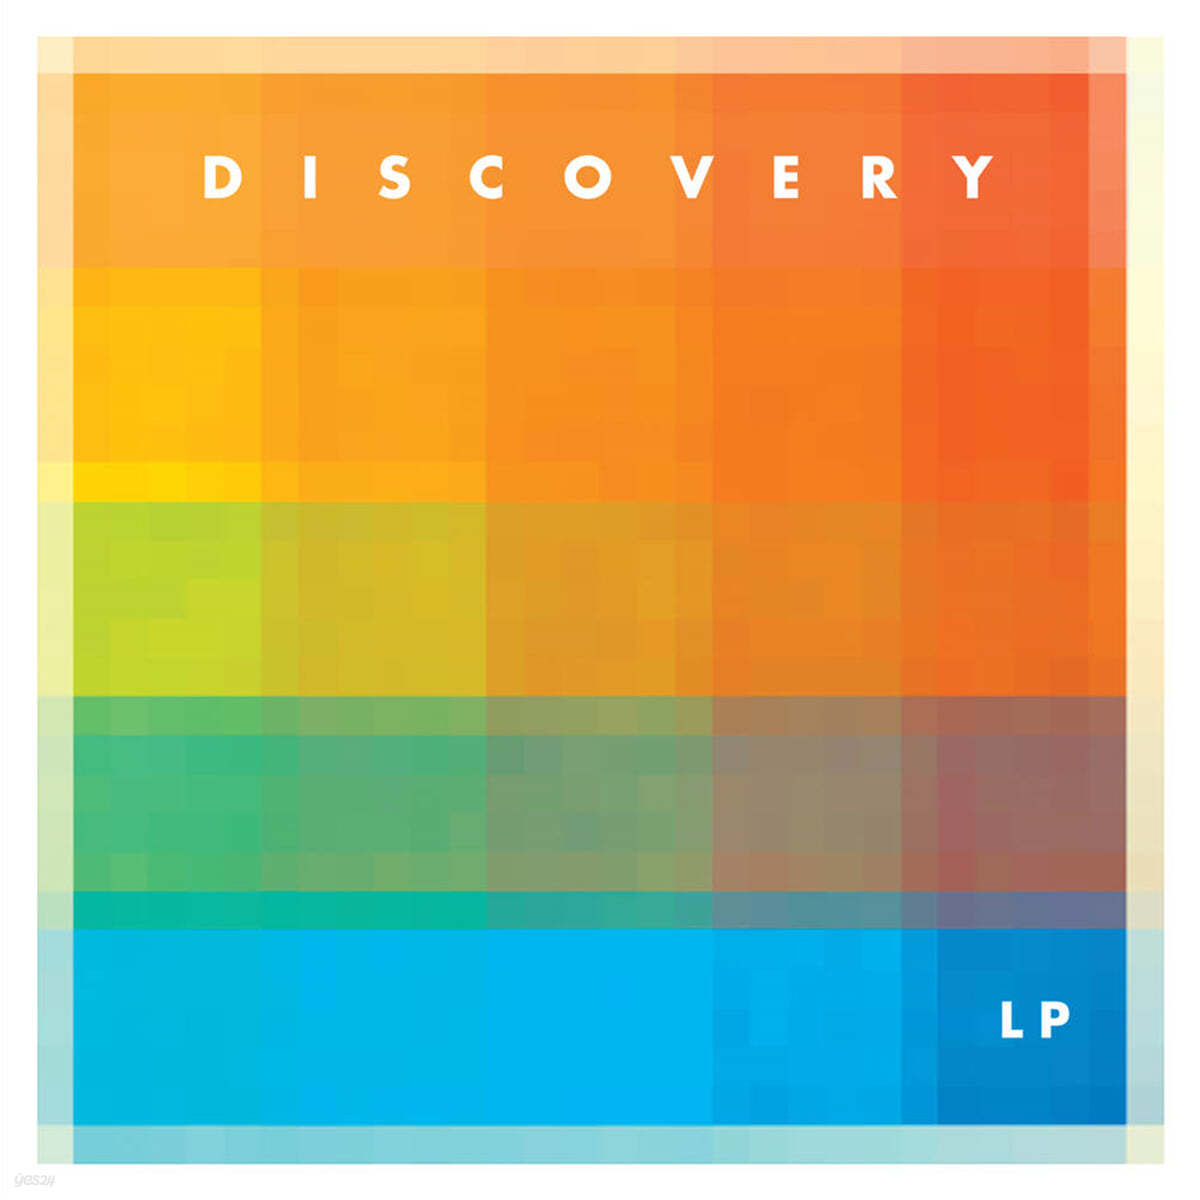 Discovery (디스커버리) - LP (Deluxe Edition) [오렌지 컬러 LP]